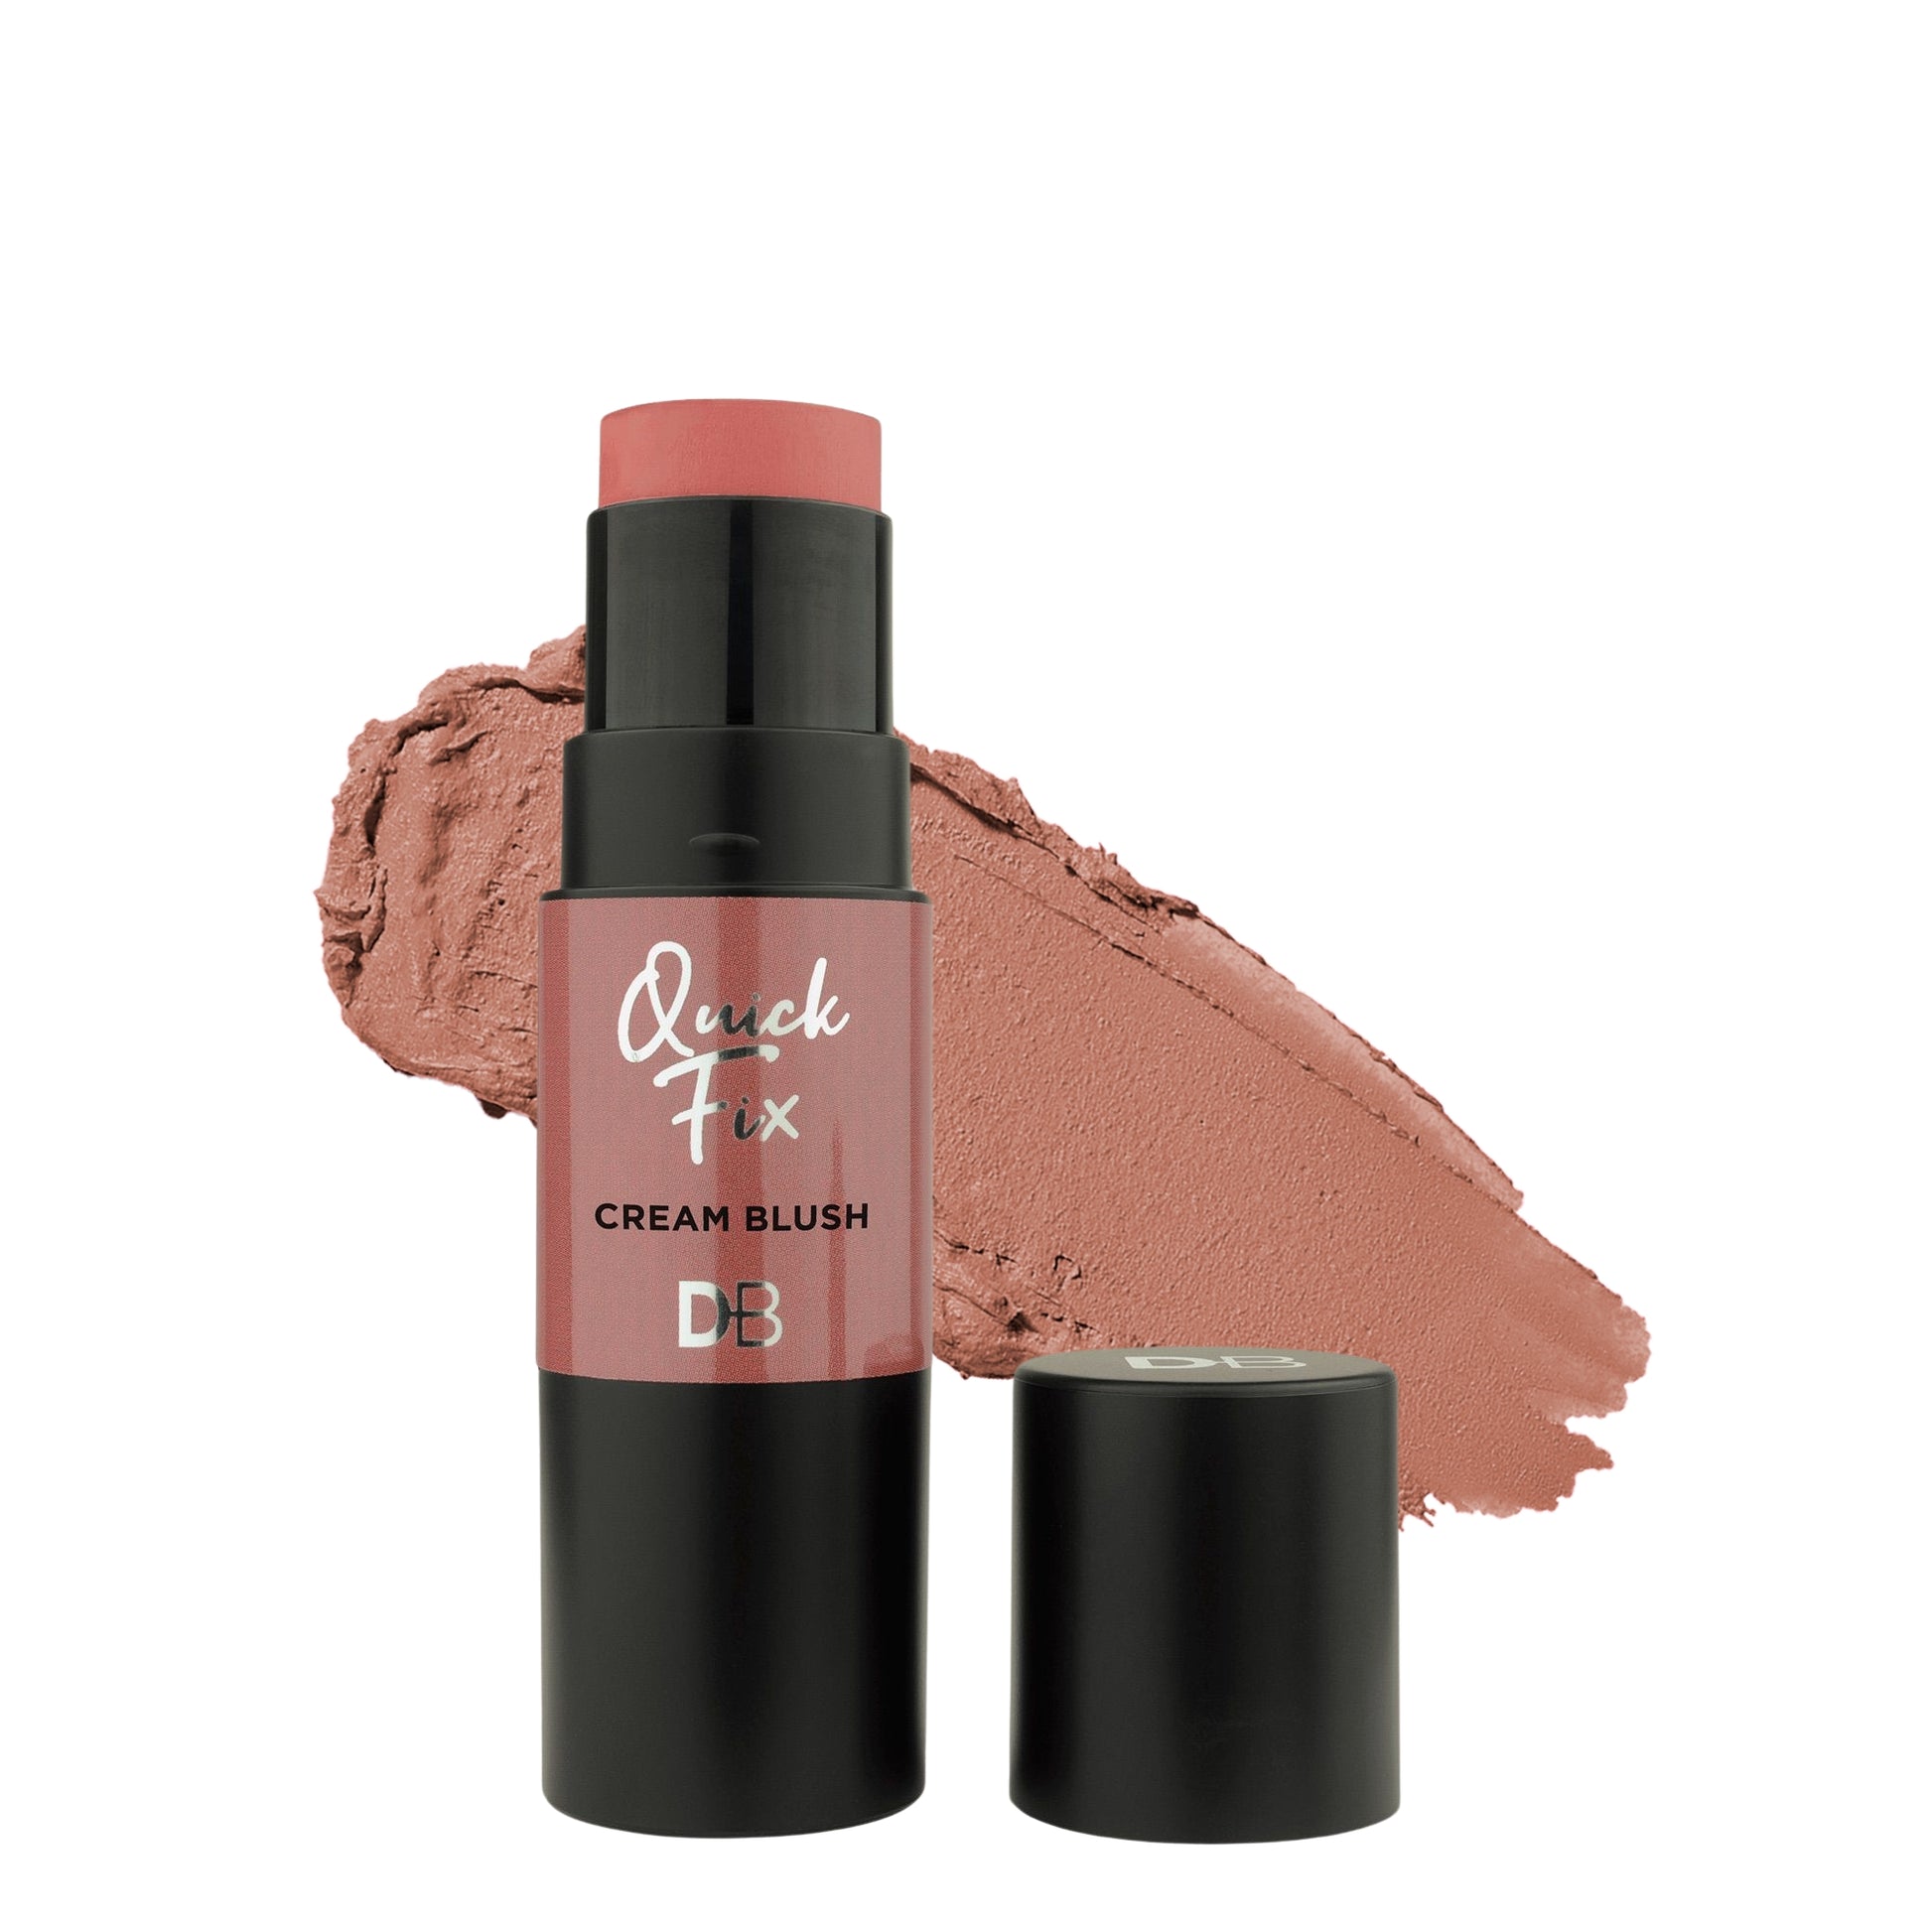 Quick Fix Cream Blush with Brush (Peachy) with swatch | DB Cosmetics